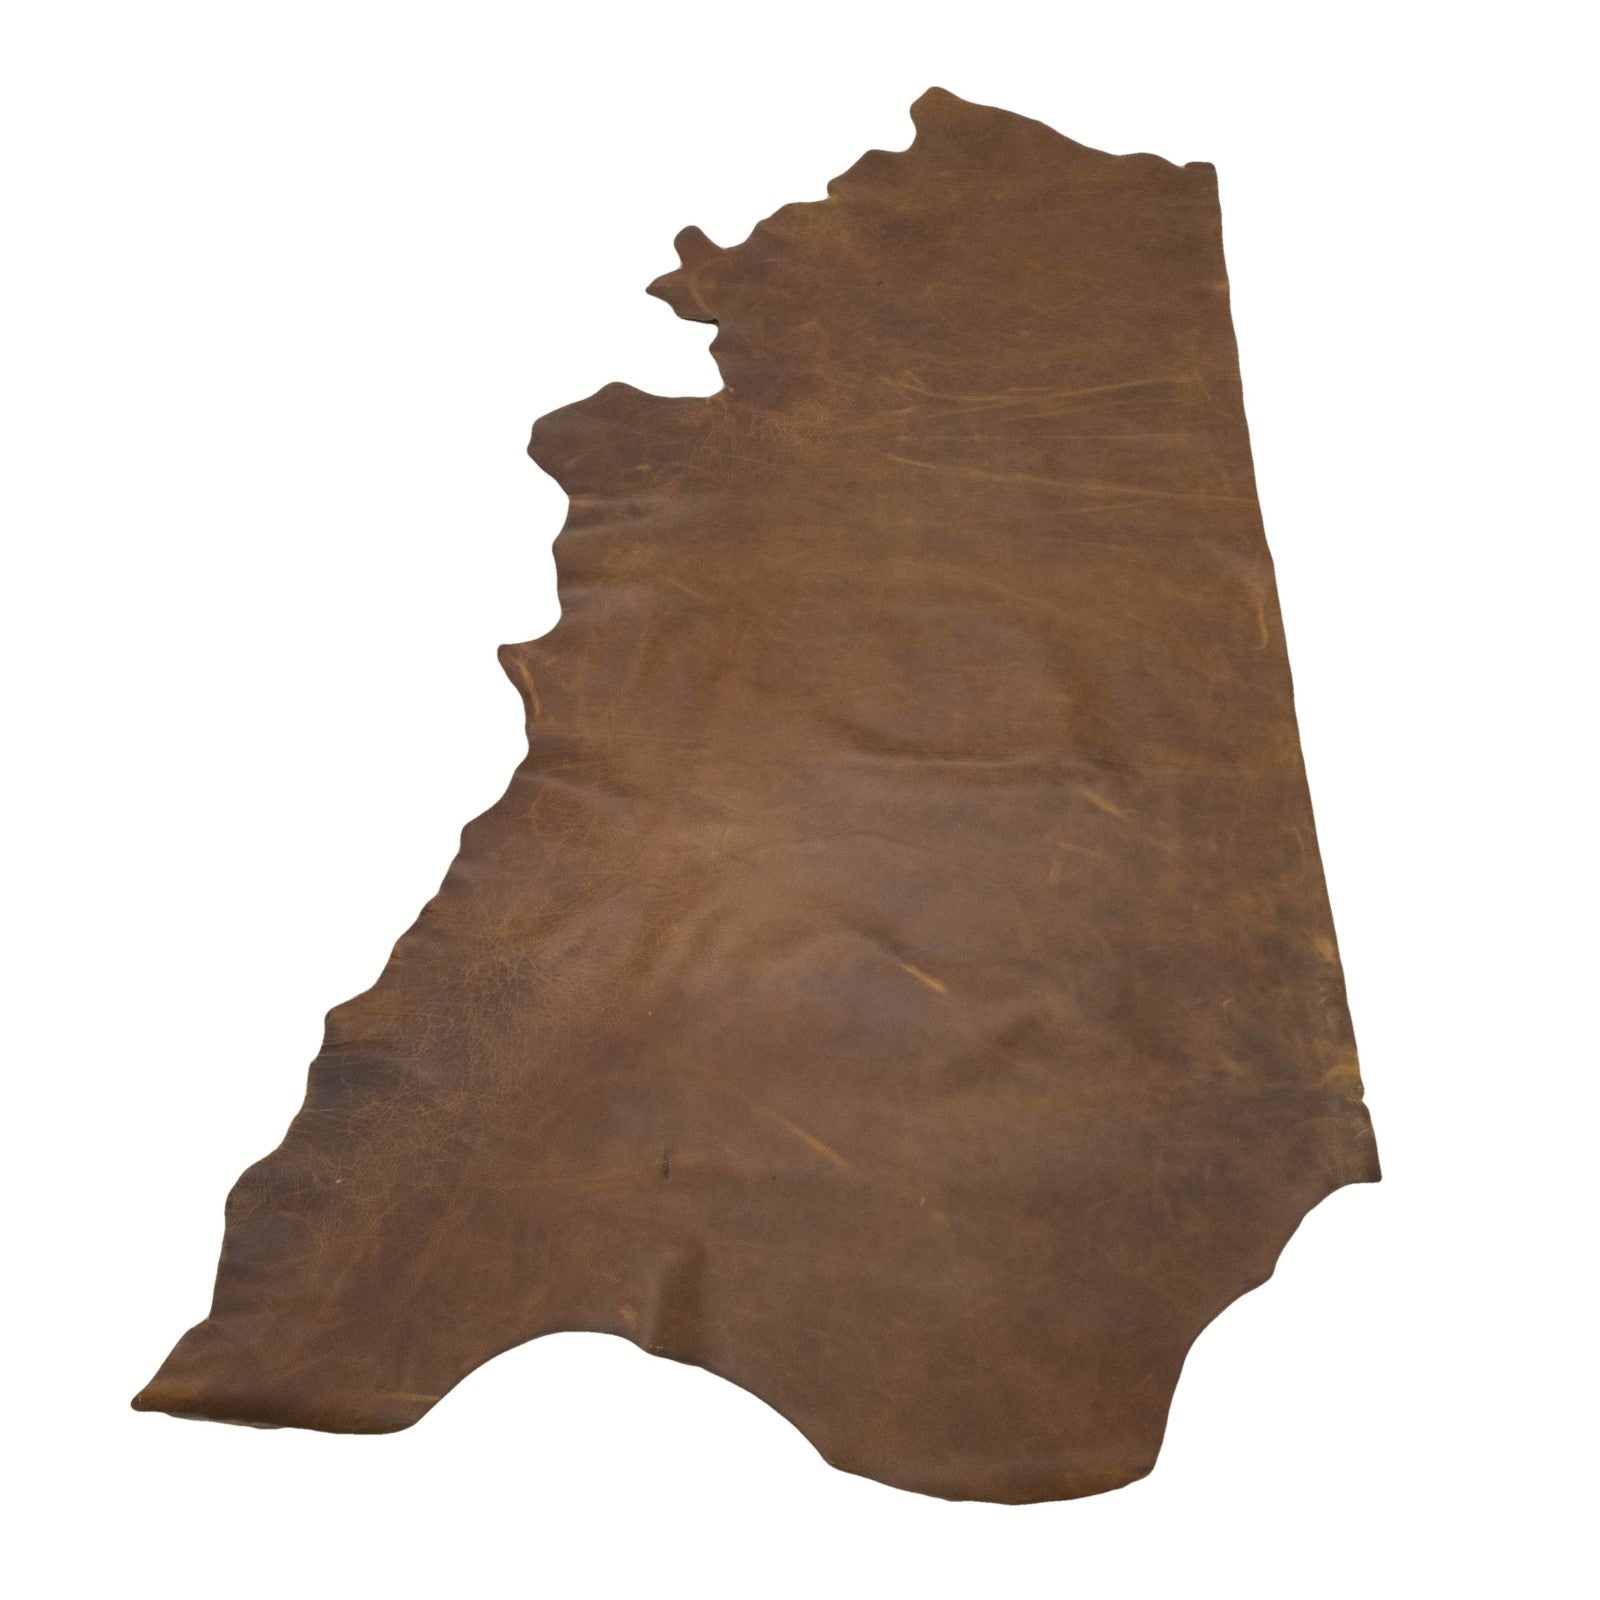 Tan, 4-5 oz, 18-29 Sq Ft, Chap Cow Side, 21-23 / Economy | The Leather Guy